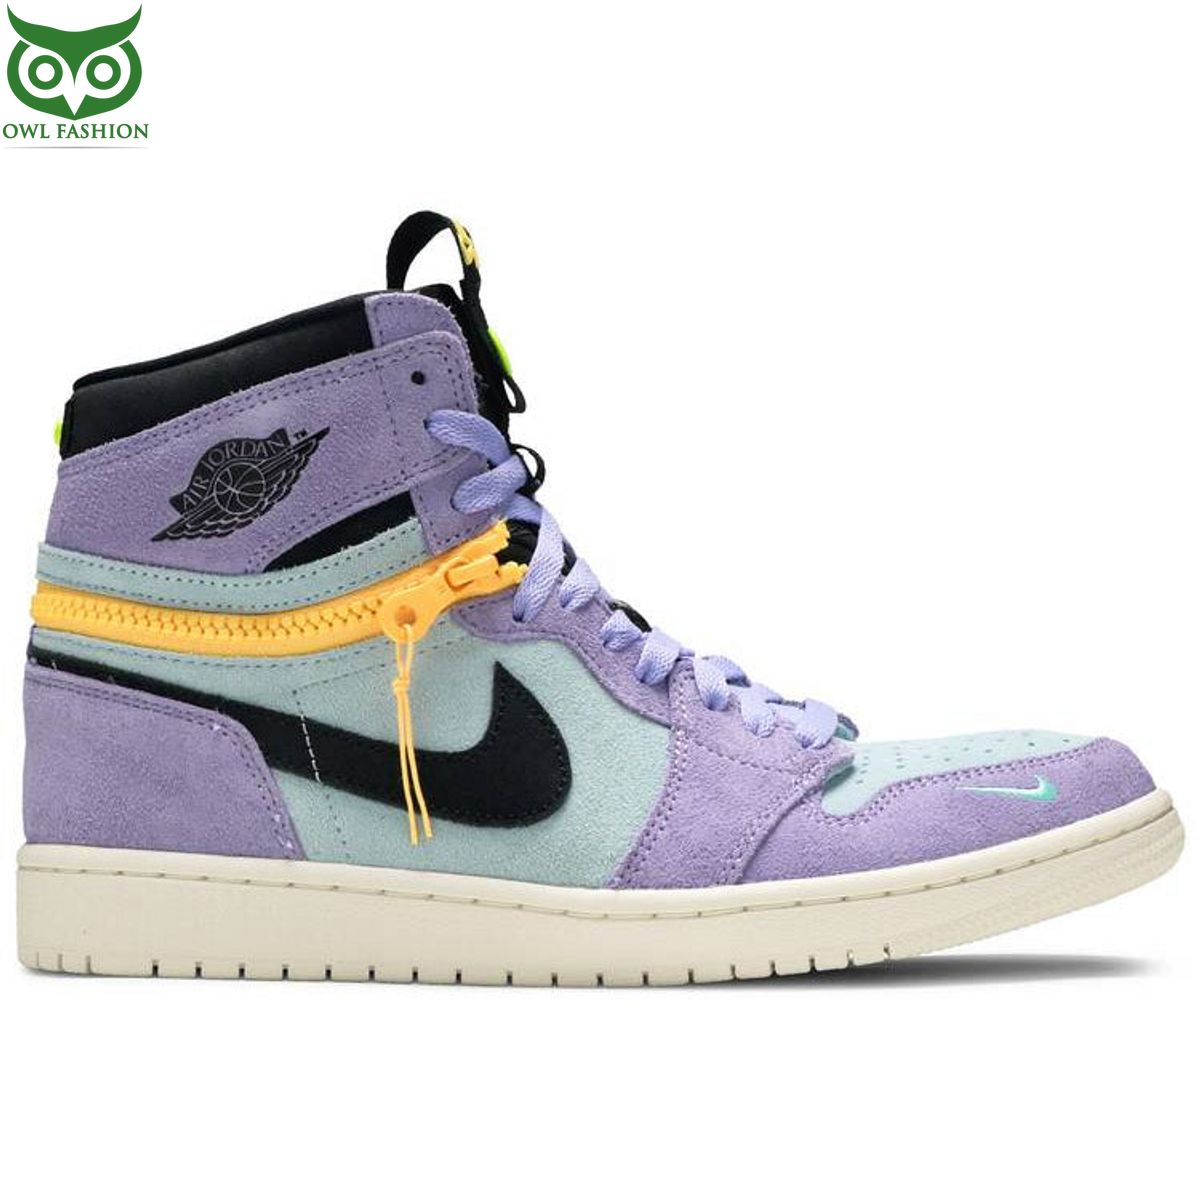 High Switch Purple Pulse Hot Air Jordan 1 Eye soothing picture dear